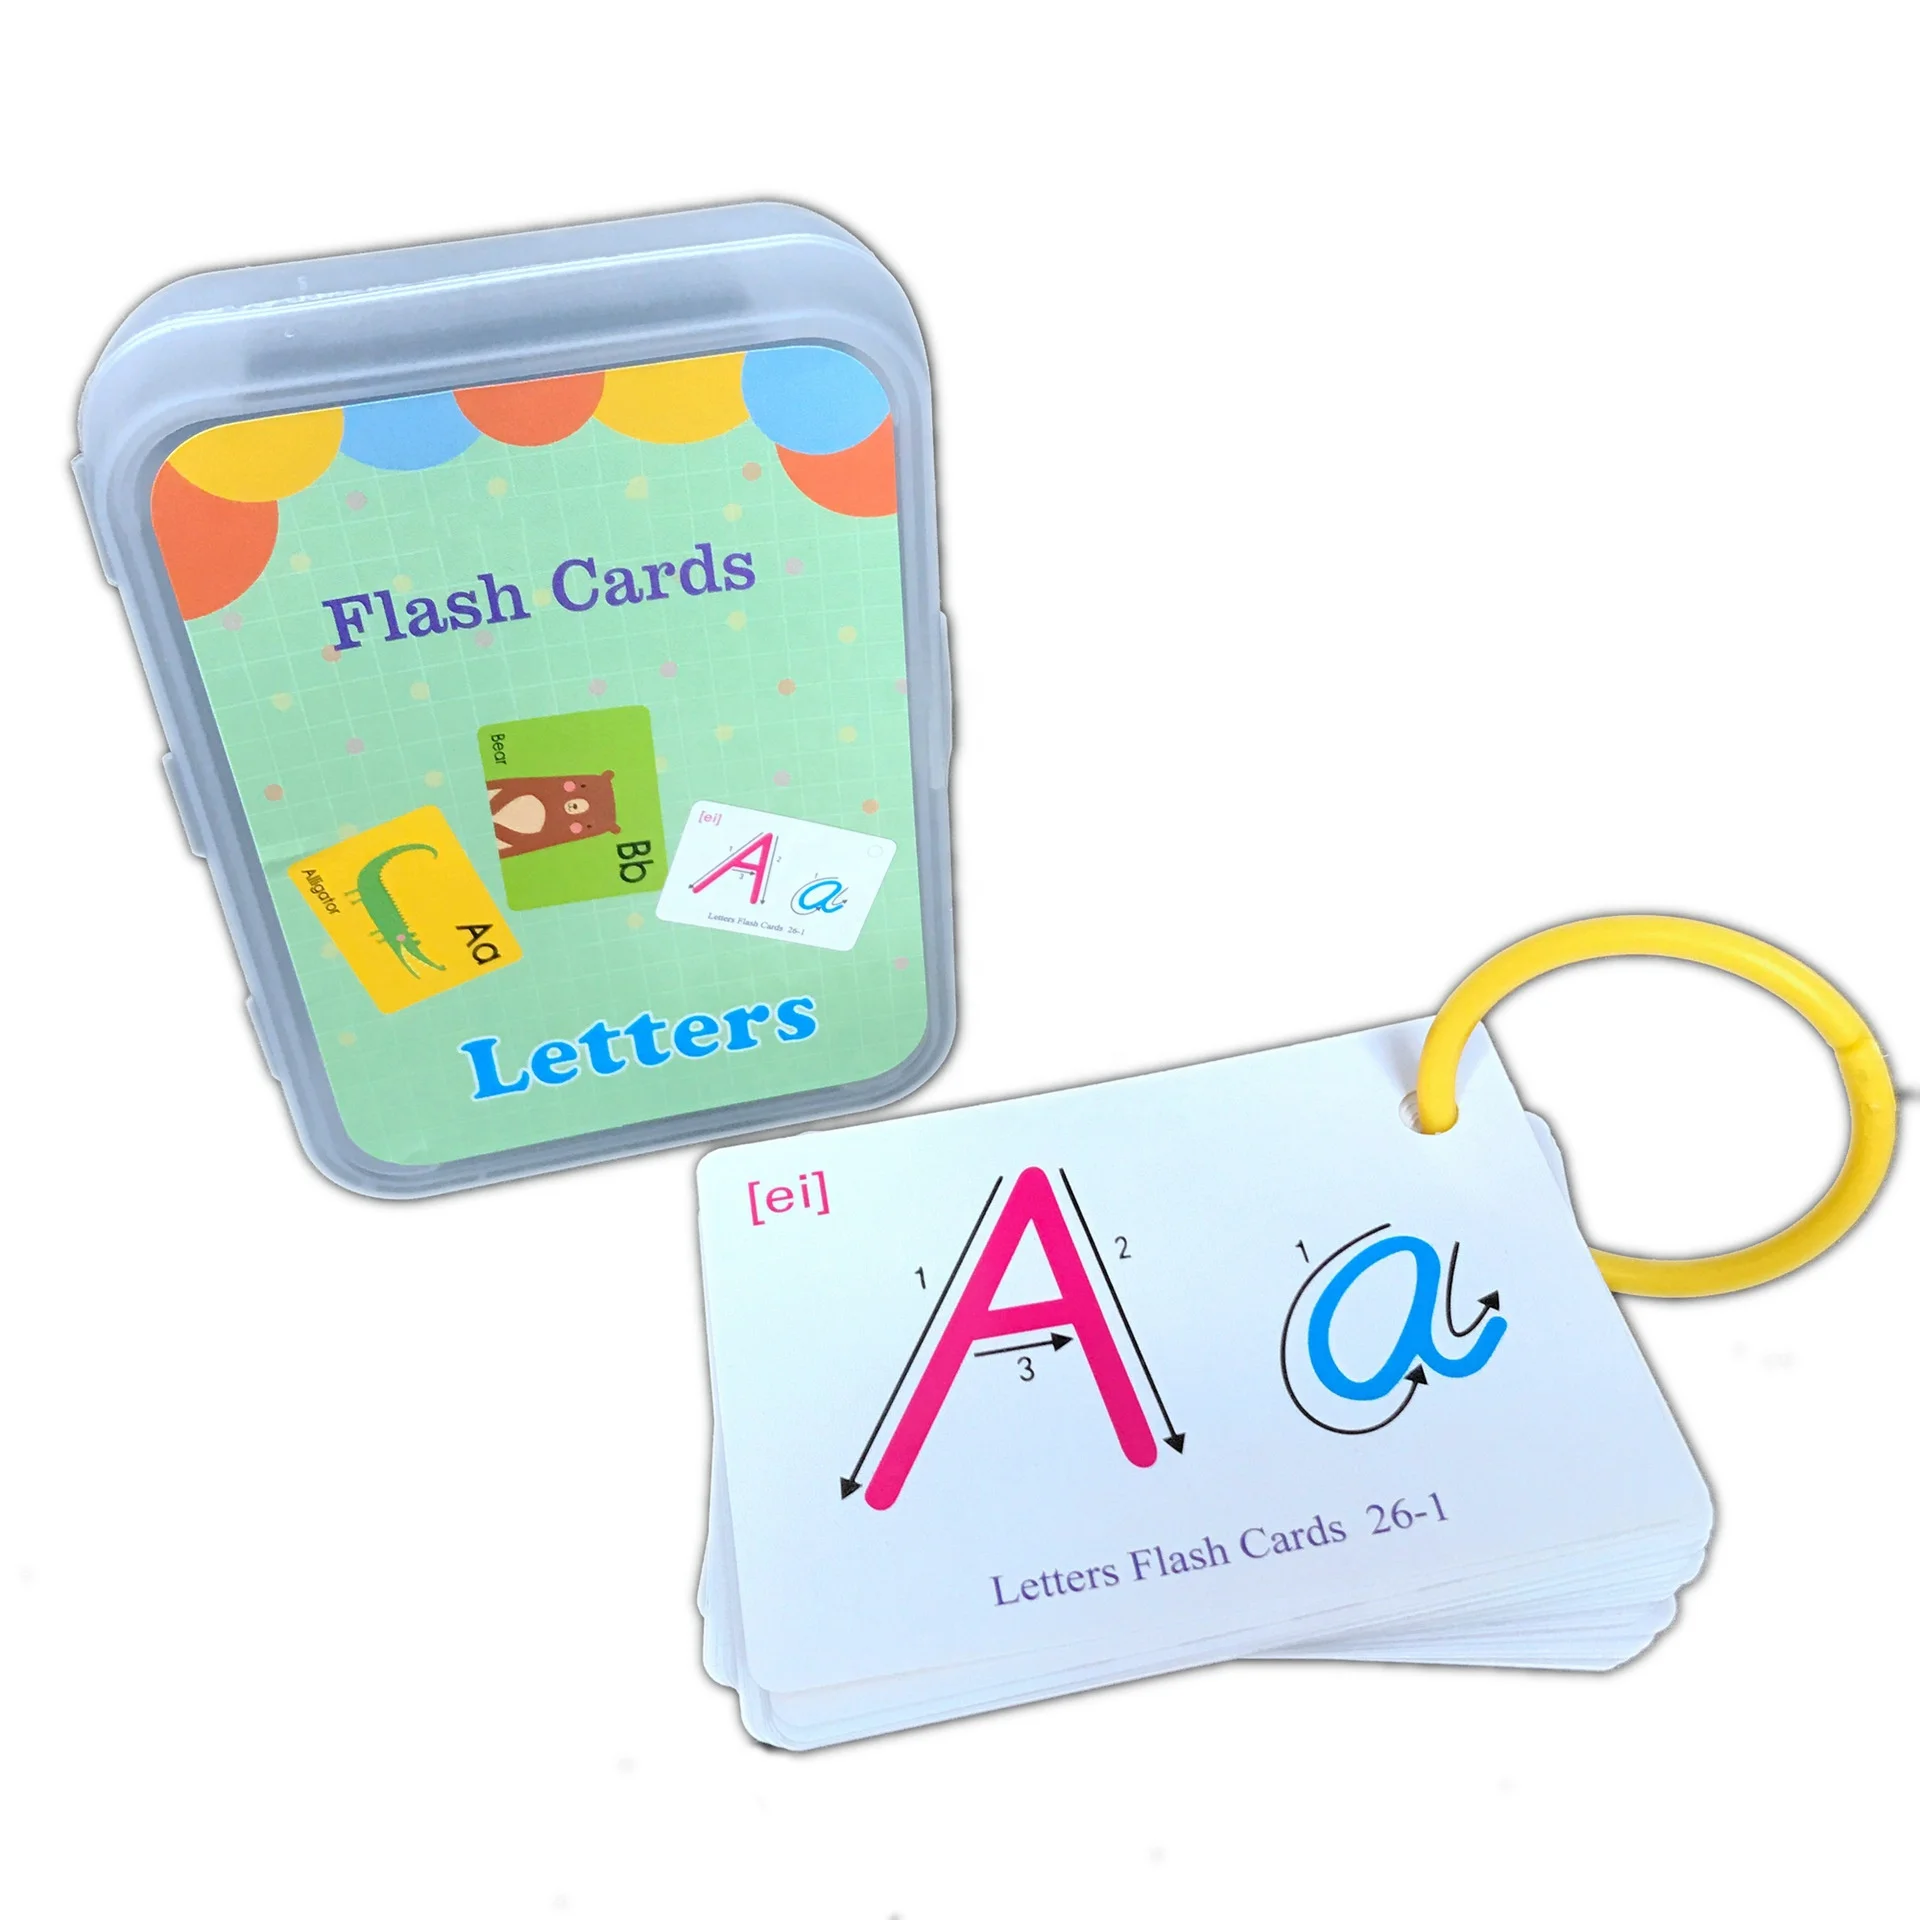 

Learning Toy Educational Preschool Toddler Flashcards Learn Colors Number Shapes Animals ABC Letters & Sight Words Flash Cards